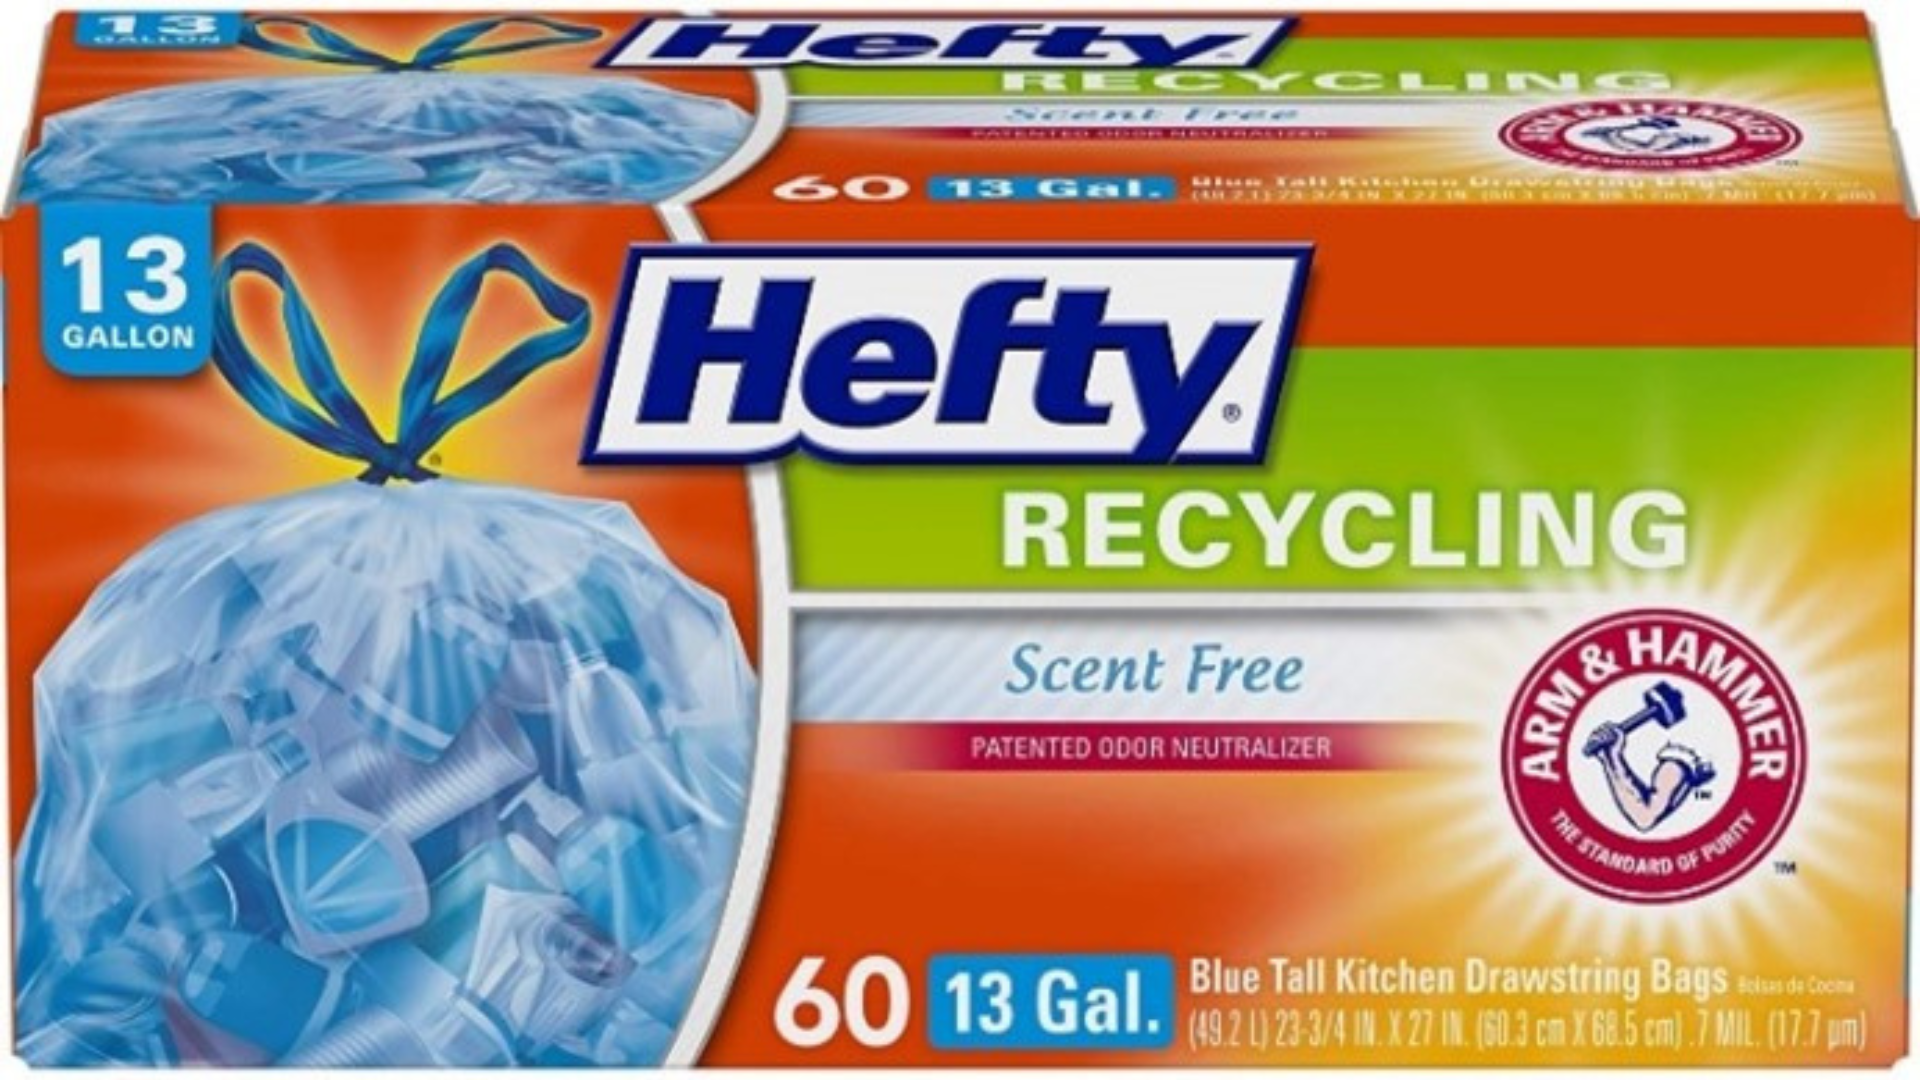 Connecticut Sues Over Trash Bags Marketed for Recycling – NBC Connecticut